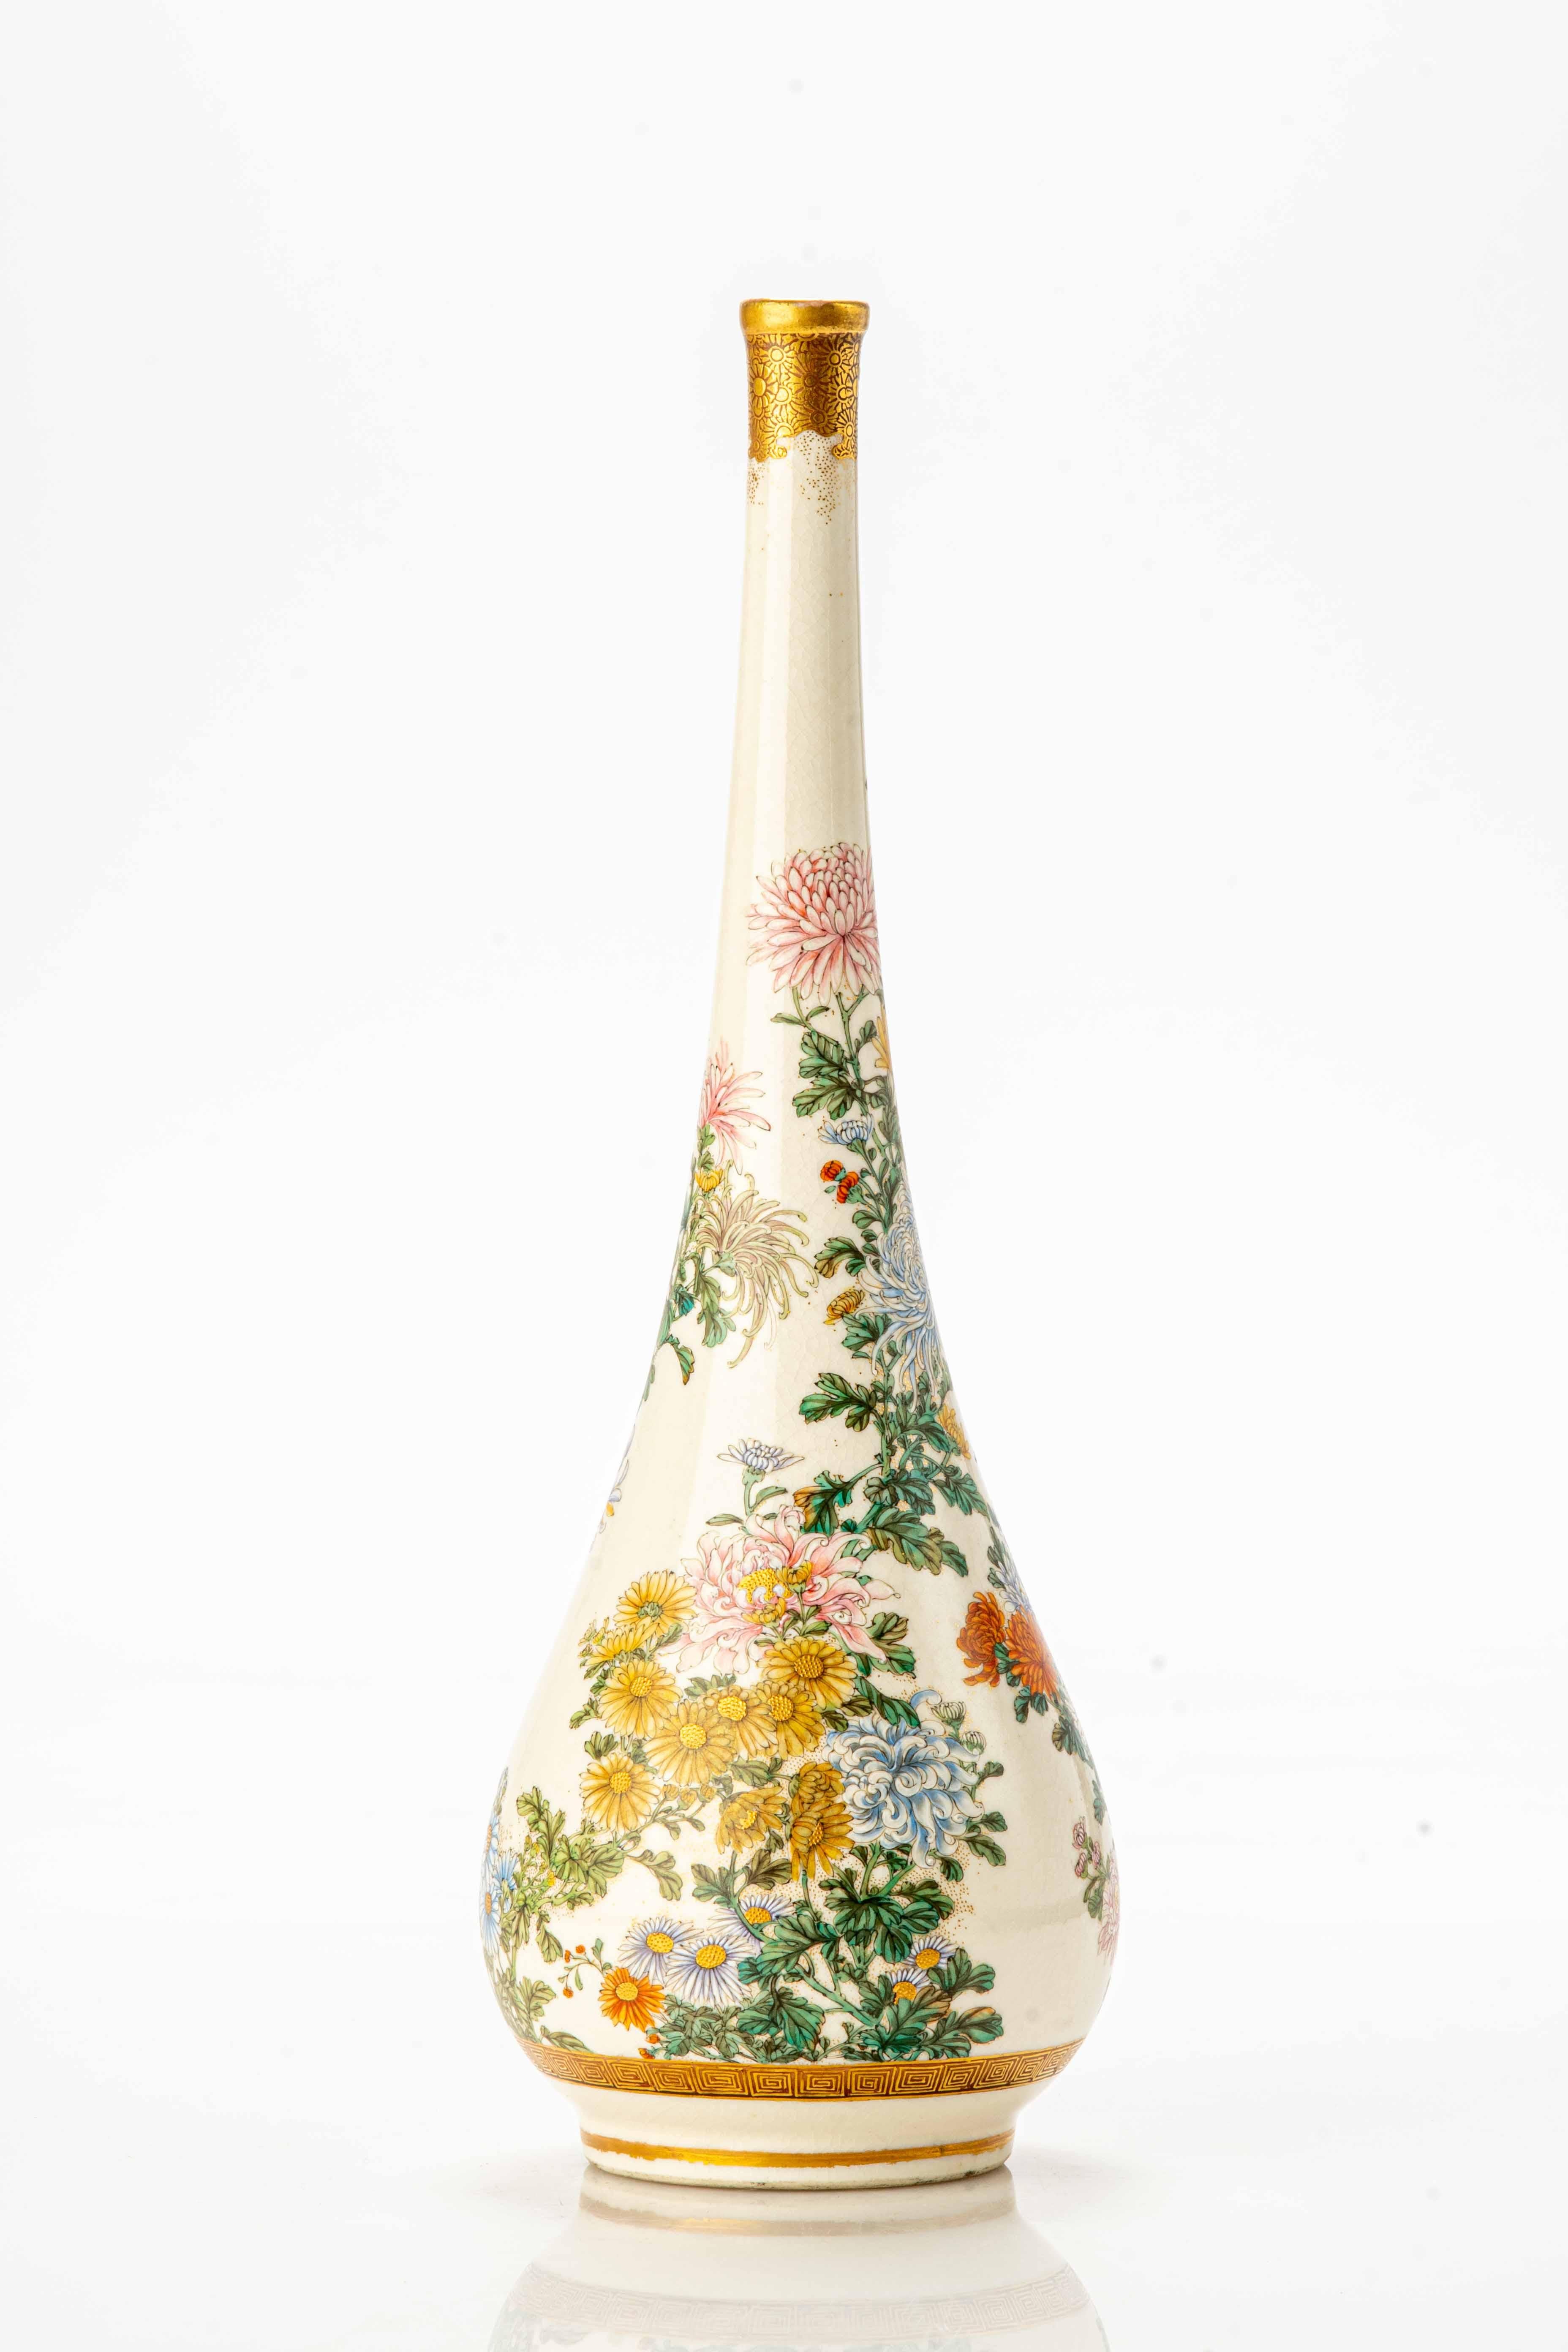 Satsuma vase, with slender neck and terminal part adorned in pure gold decorated with a garden of chrysanthemums, made with enamel and gold in relief.

Different varieties of chrysanthemums are depicted, with precision and detail, which differ in